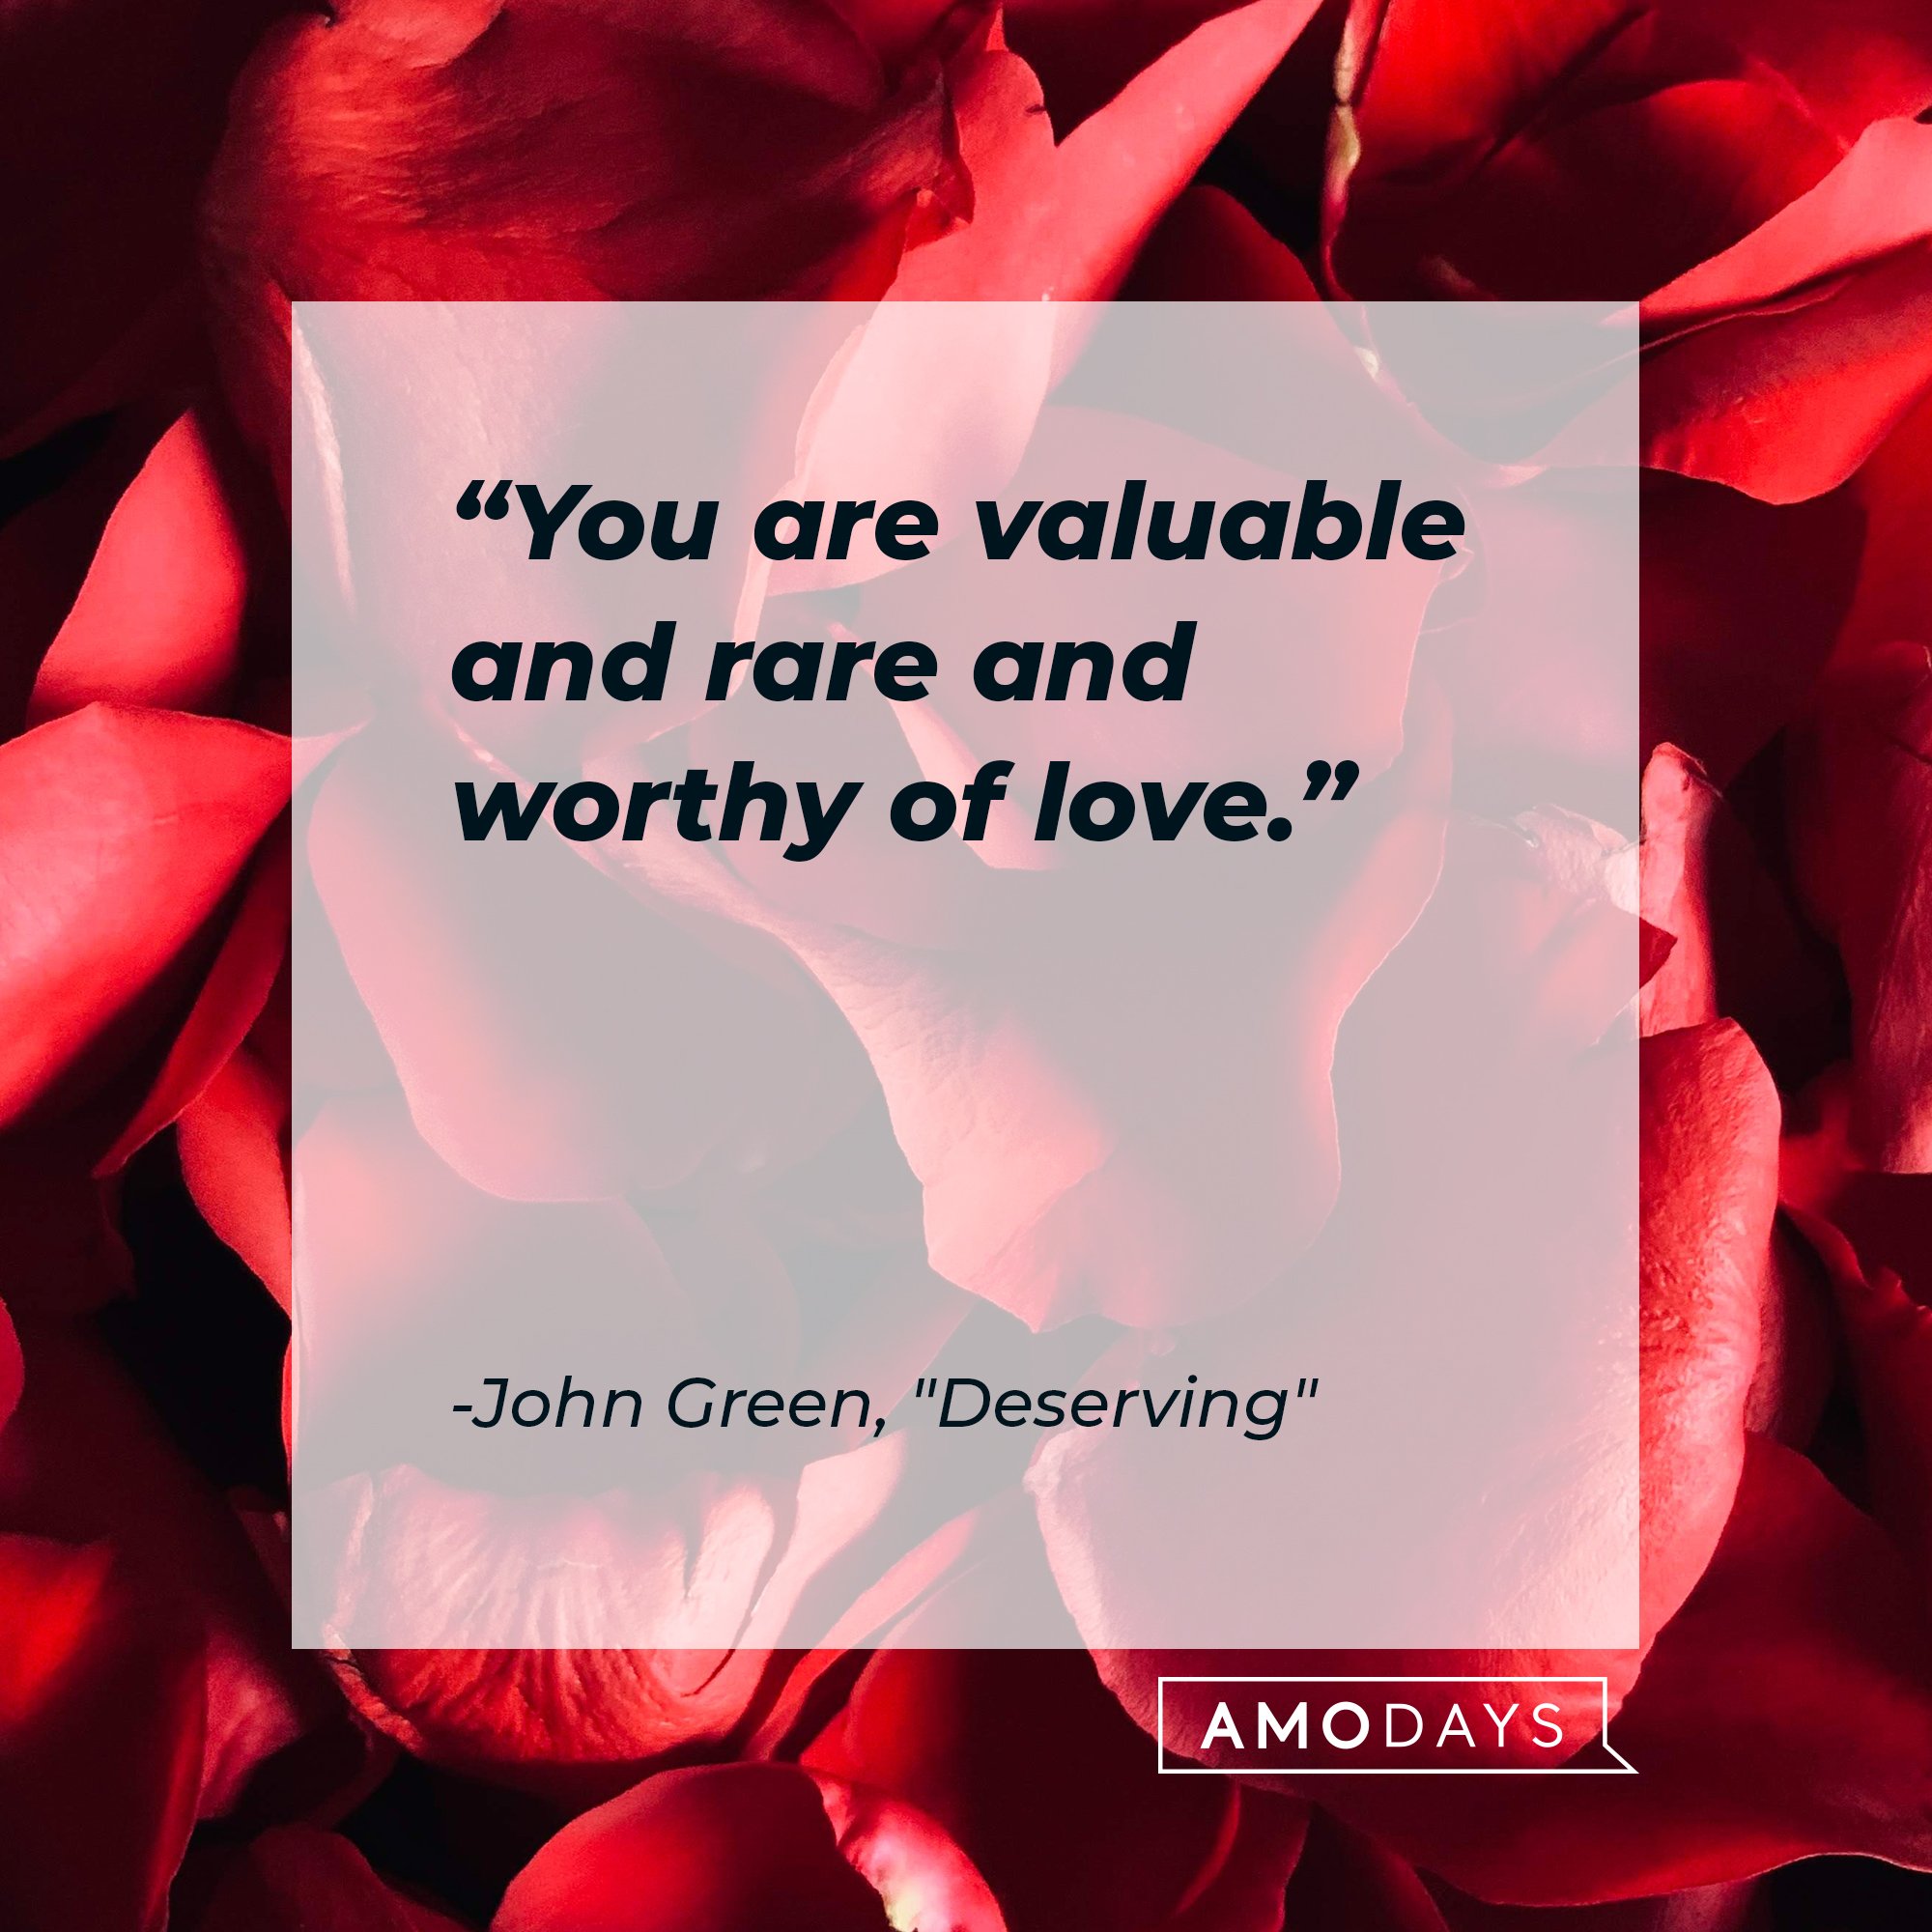 John Green's quote: "You are valuable and rare and worthy of love." | Image: AmoDays